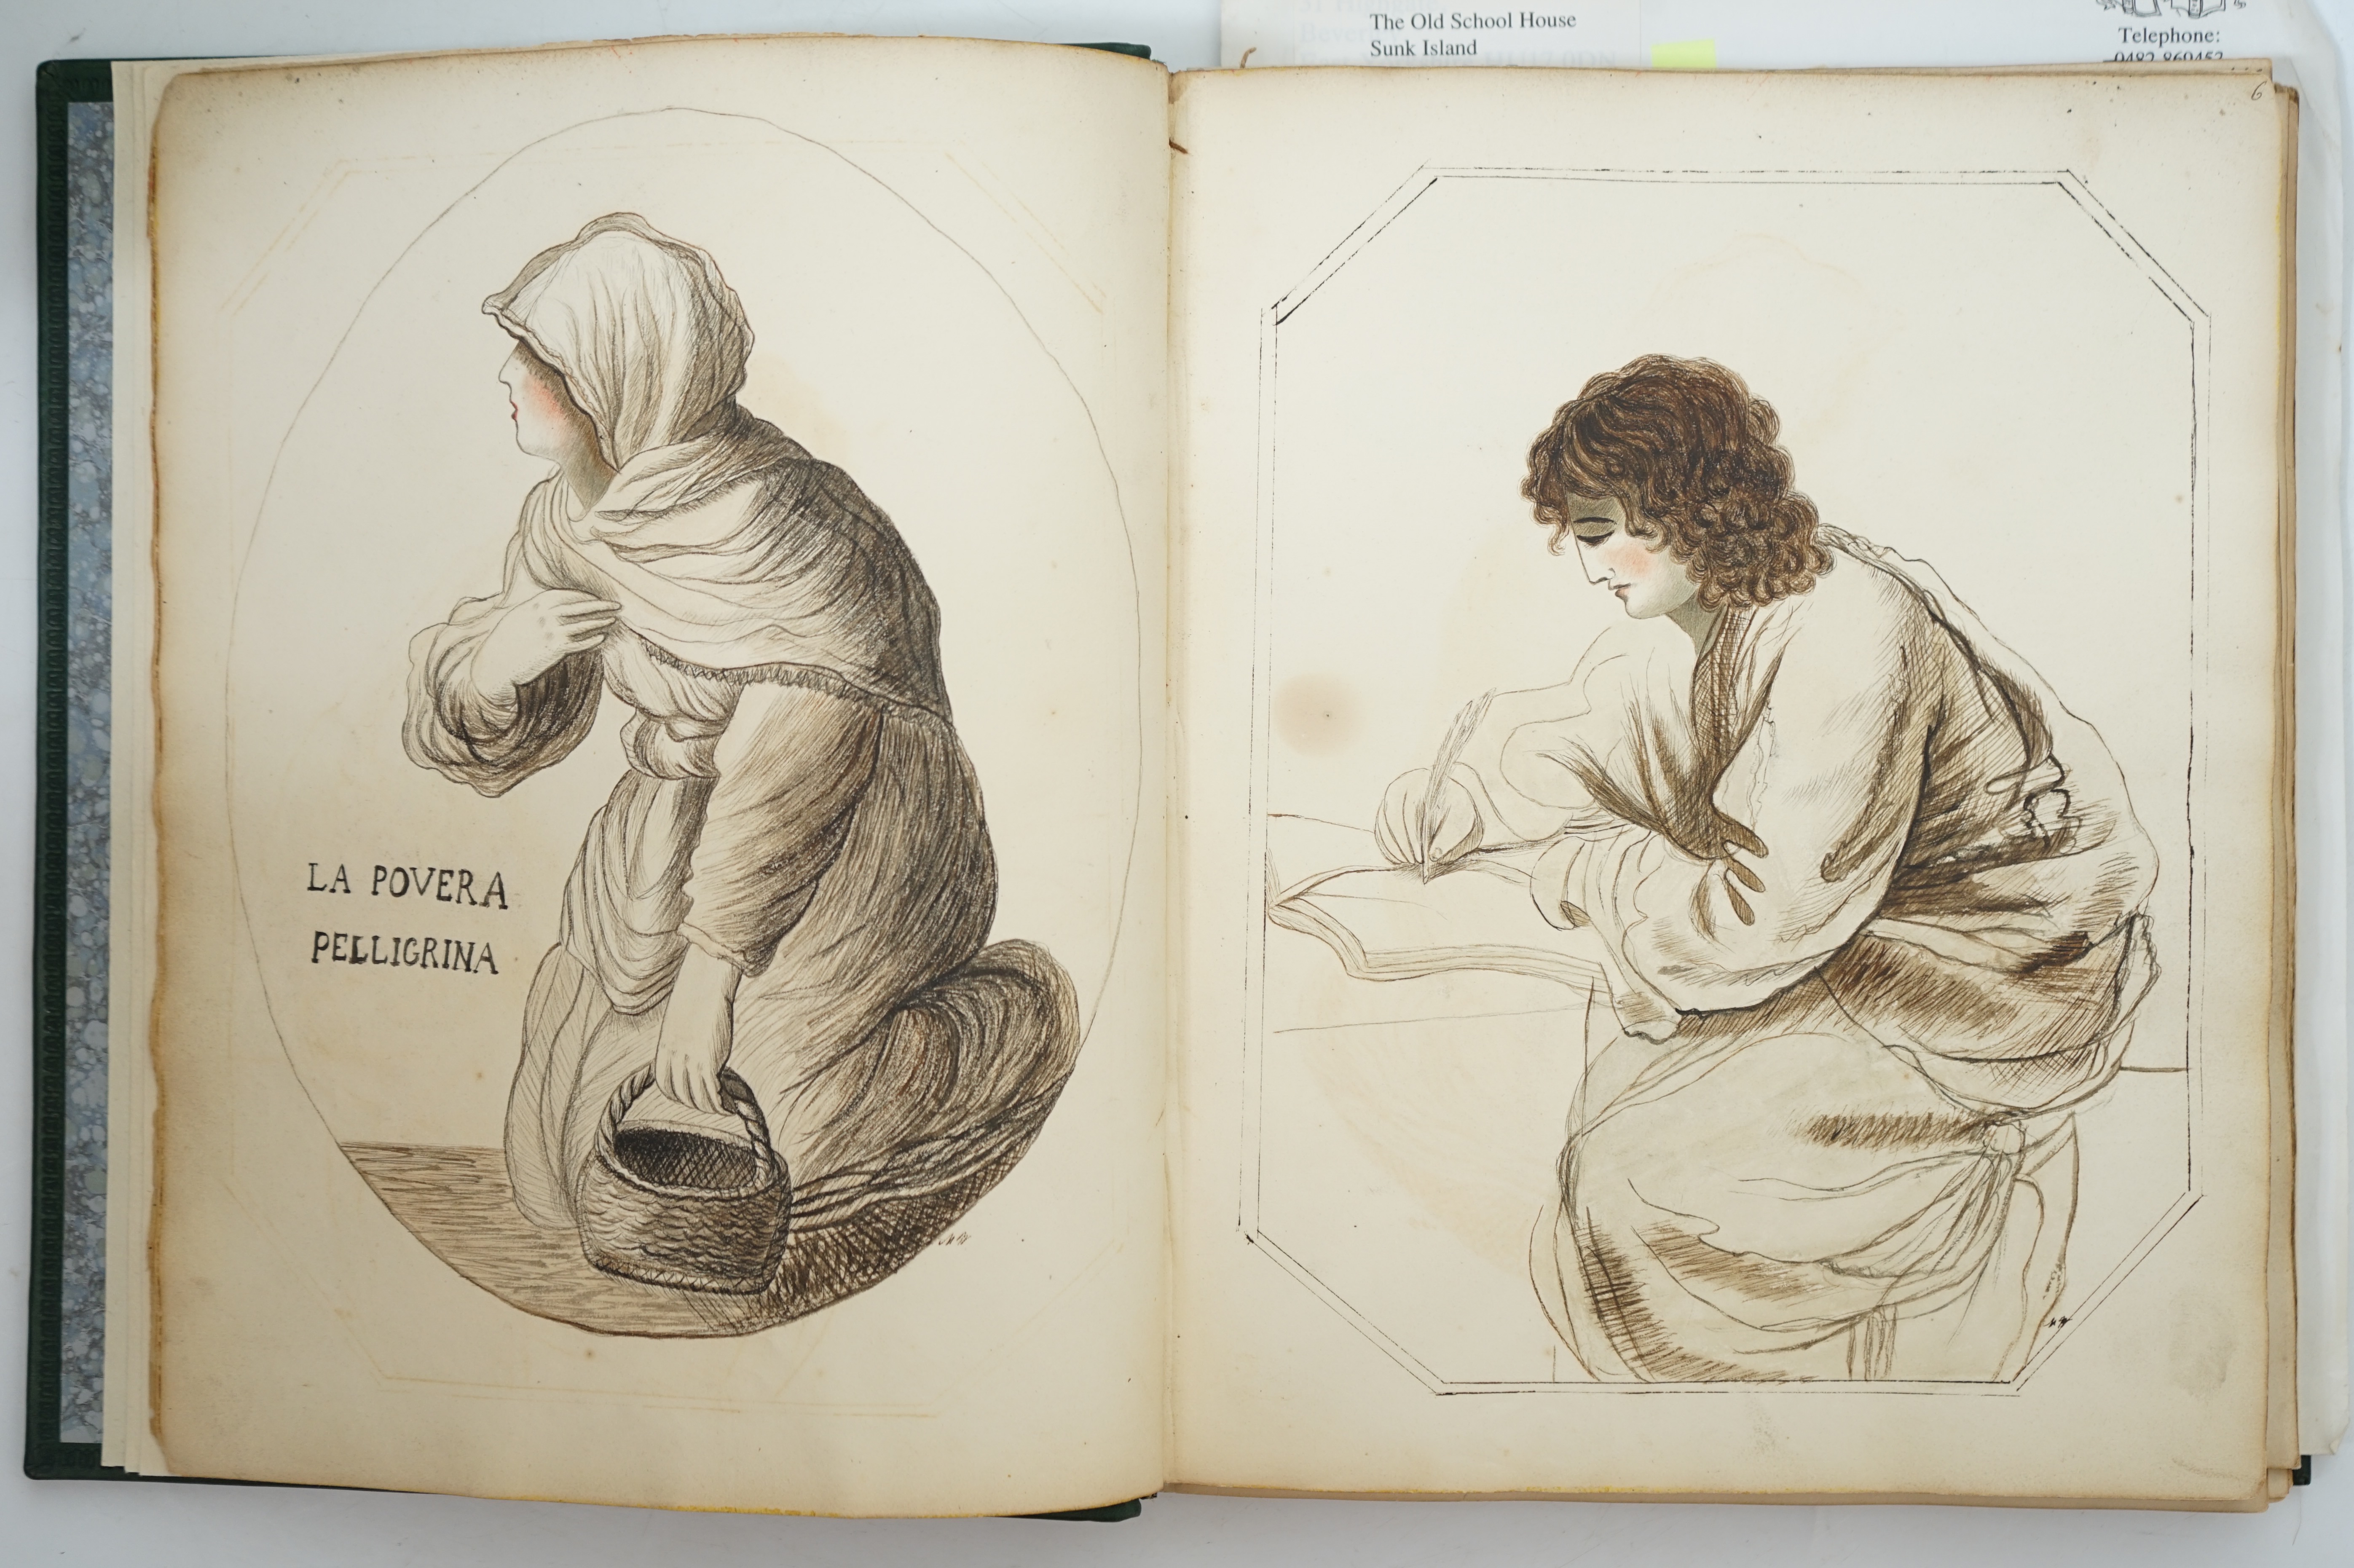 Commonplace book of verse, watercolours and sketches compiled by Mary Watson and her sister Eliza Watson of Farnsfield in Nottinghamshire, 1802-1820, subsequently augmented by William A Ross, 1850-1852